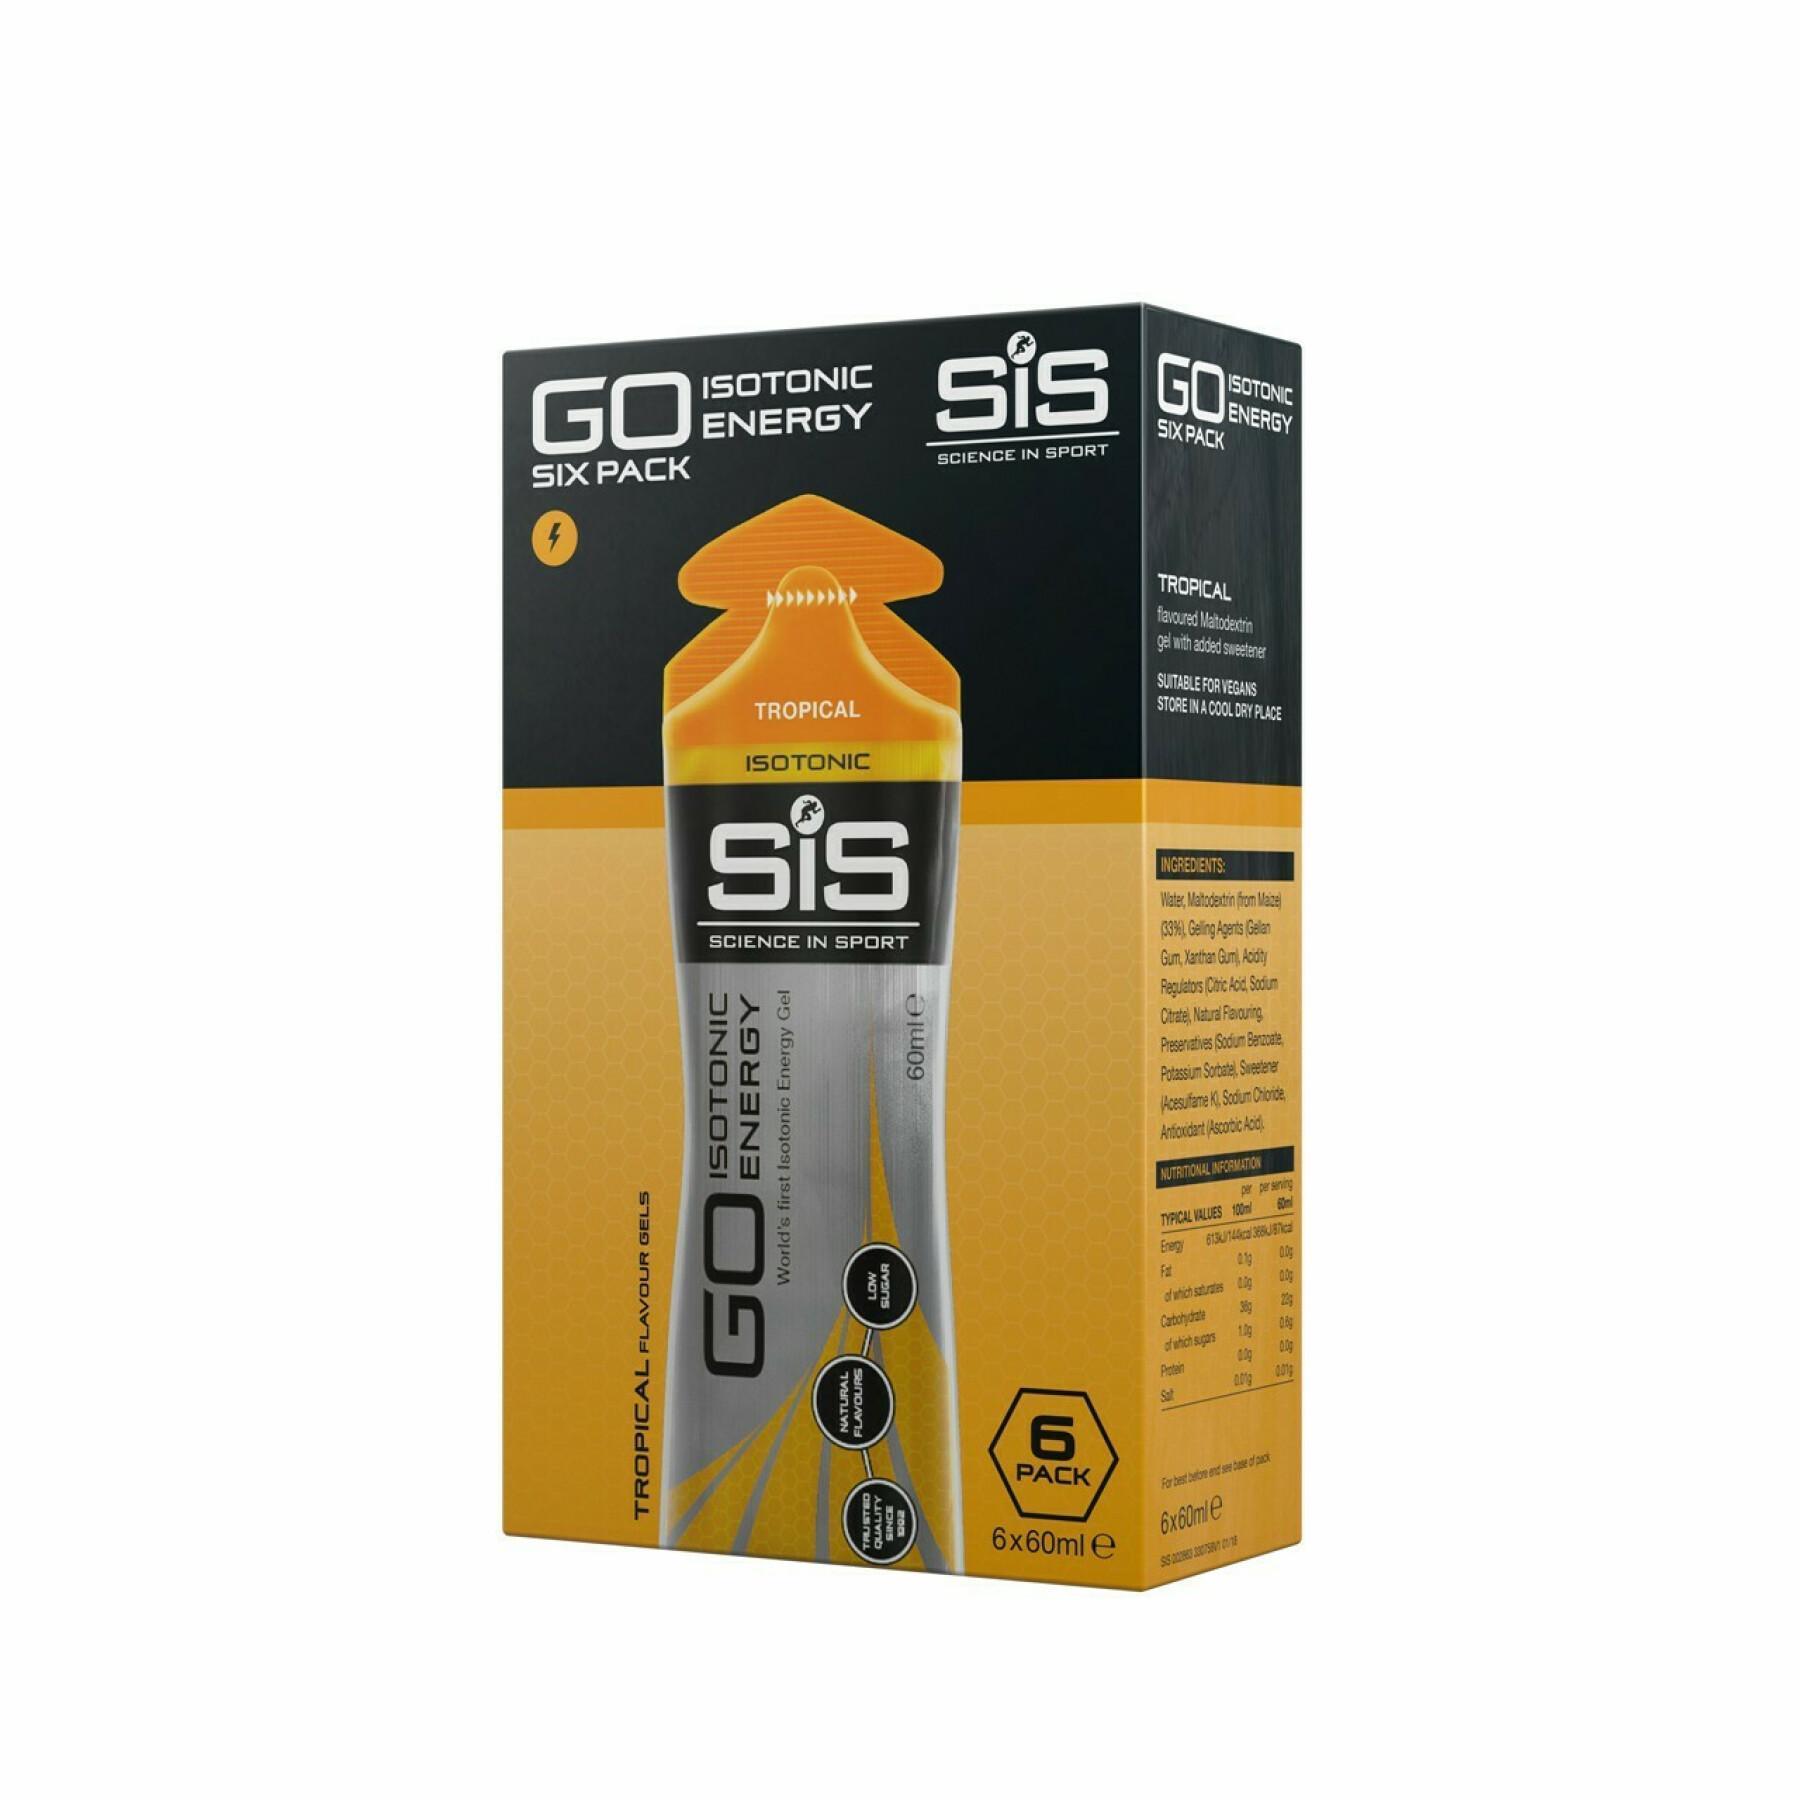 Energy gel Science in Sport Go Isotonic - Tropical - 60 ml